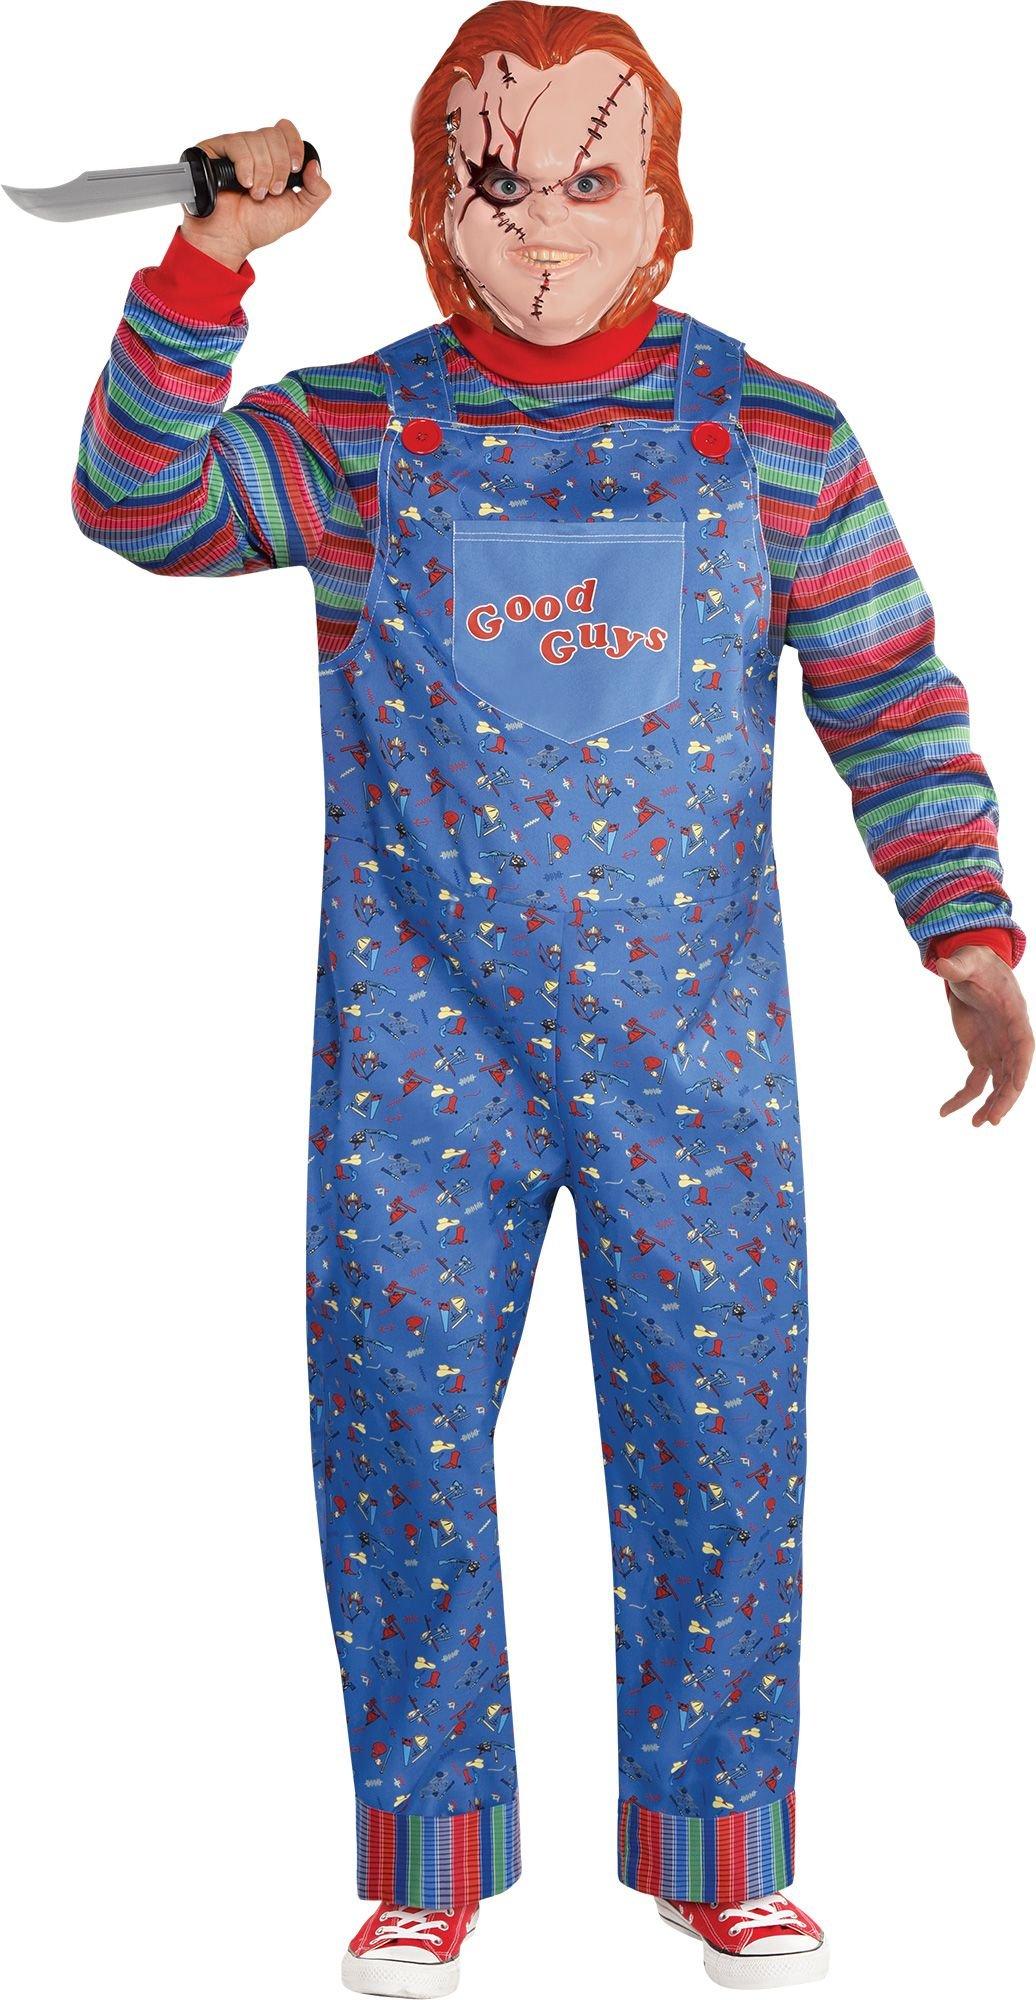 Mens Chucky Costume Plus Size - Child's Play | Party City